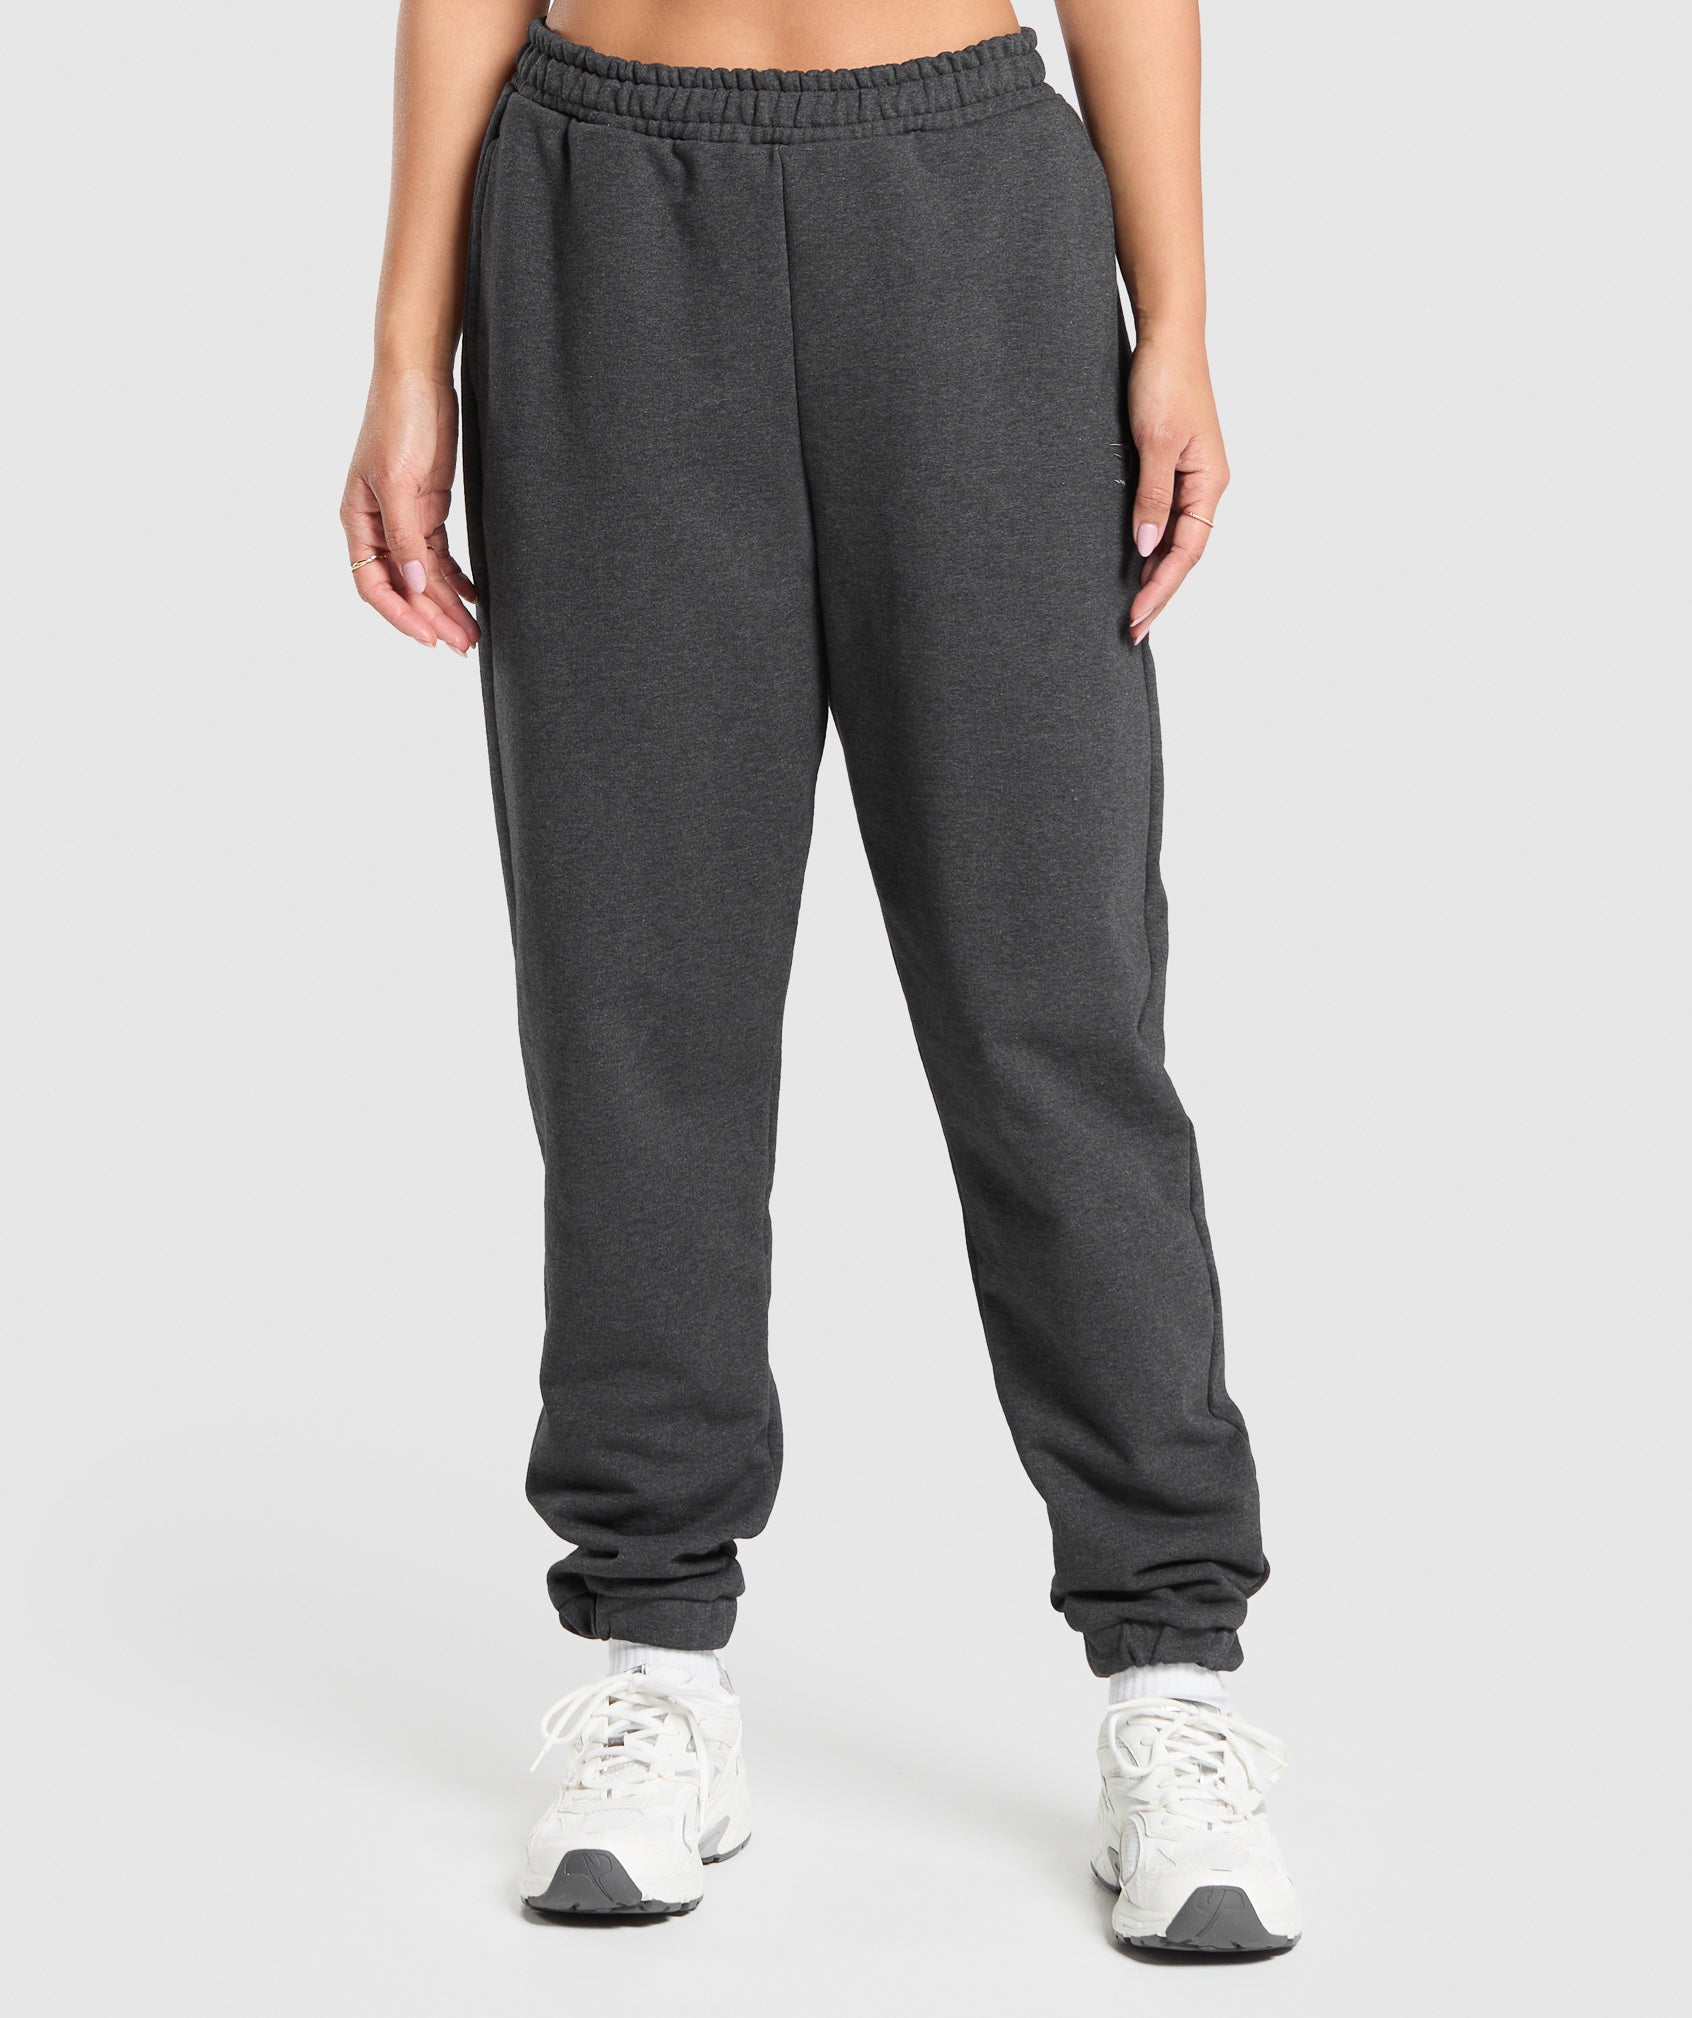 Rest Day Sweats Joggers in Black Marl